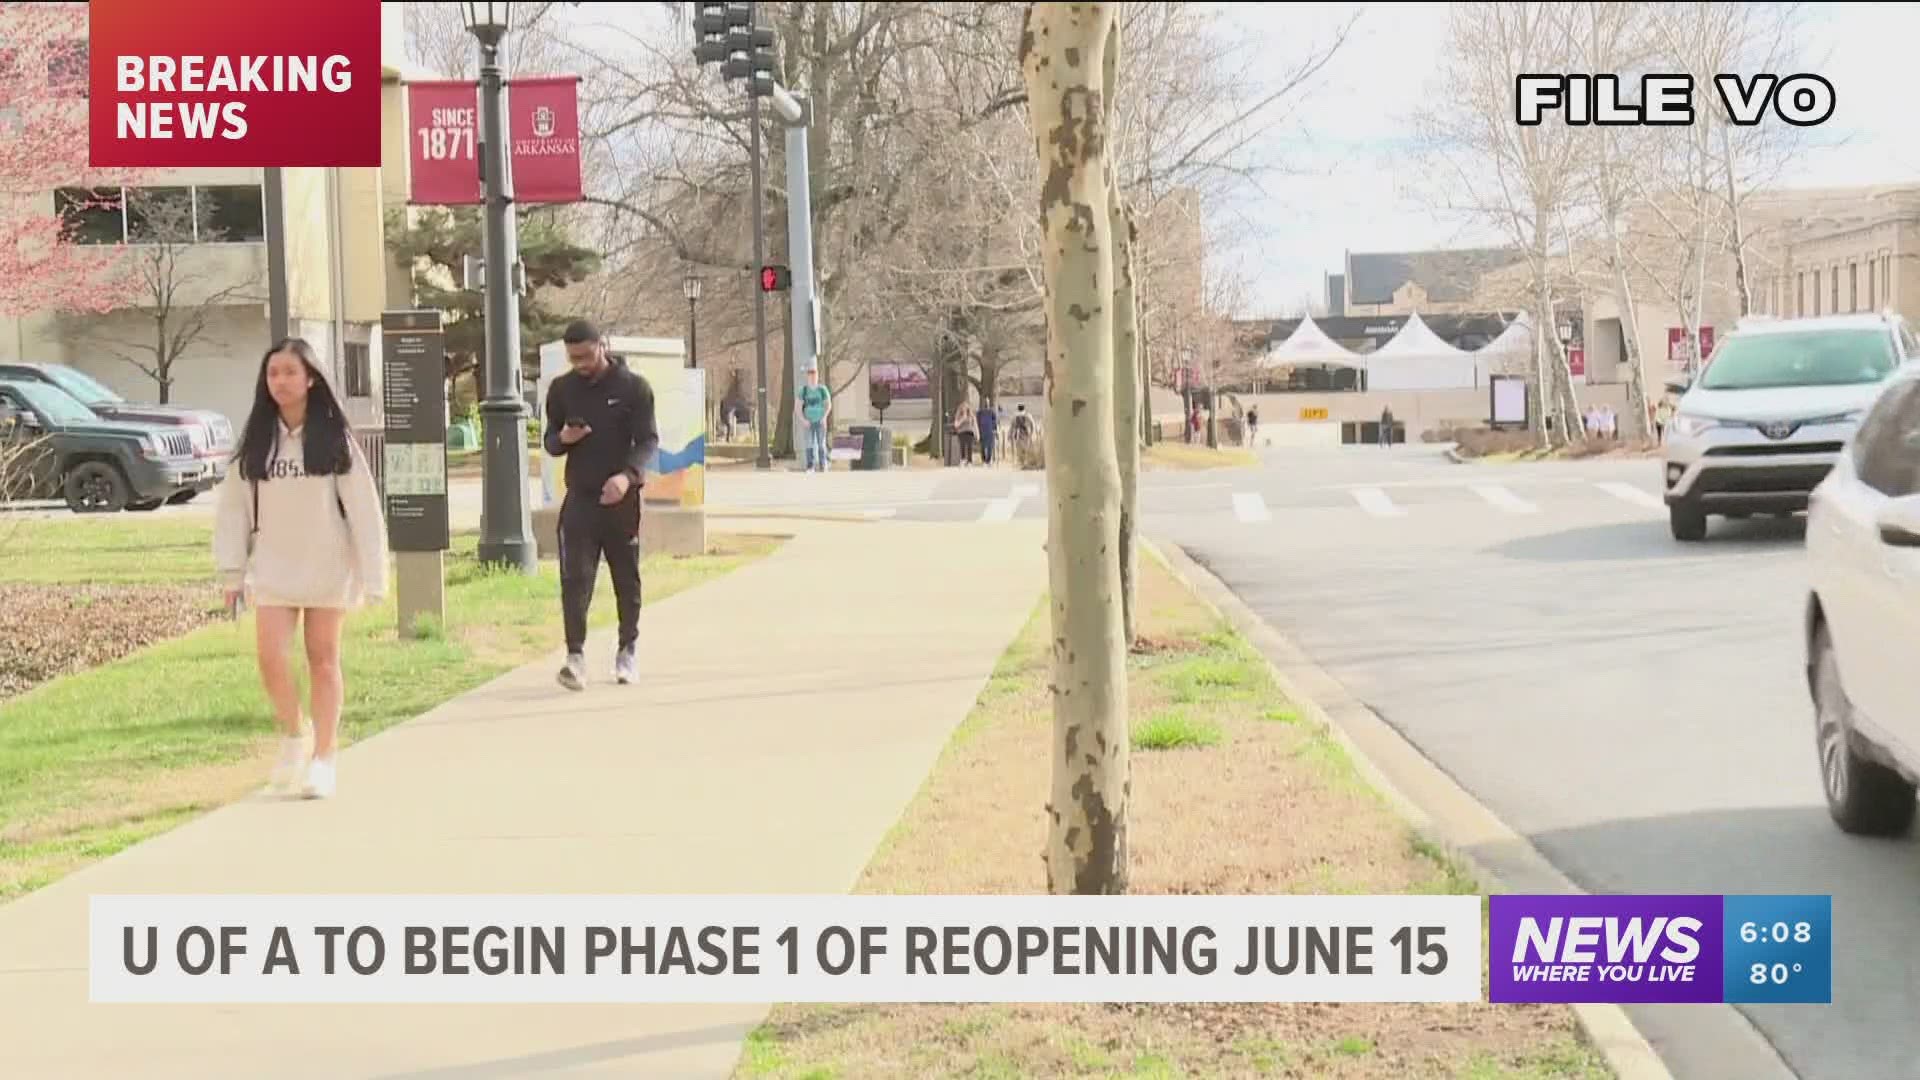 University of Arkansas to begin Phase 1 of reopening campus on June 15